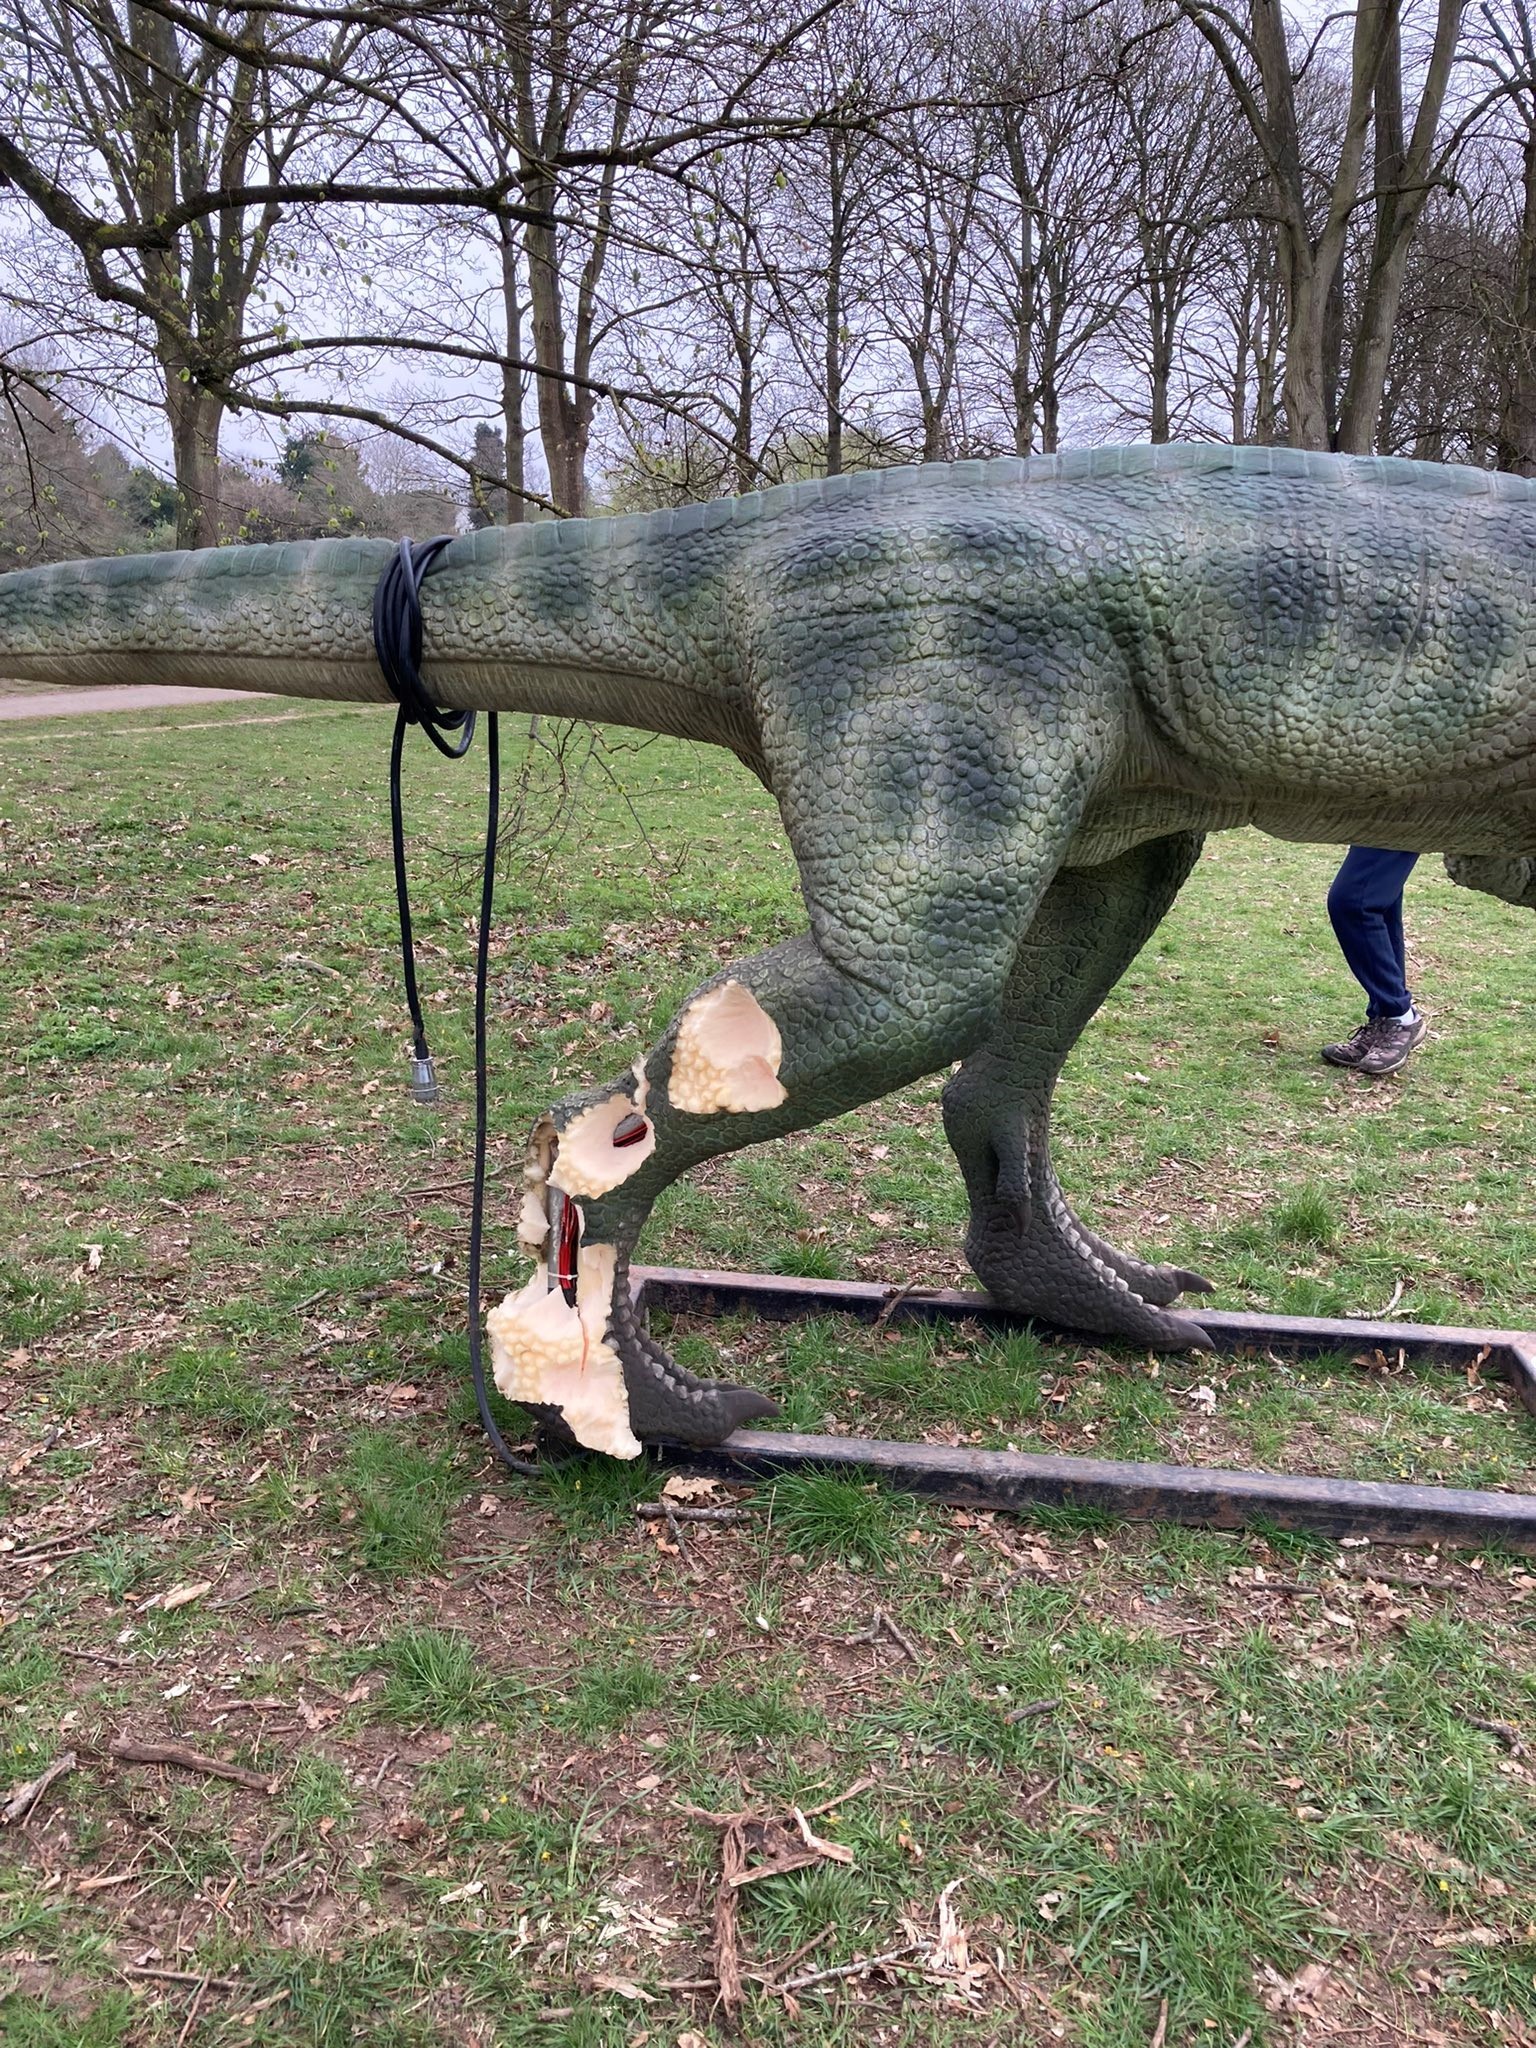 A dinosaur before the exhibition opened